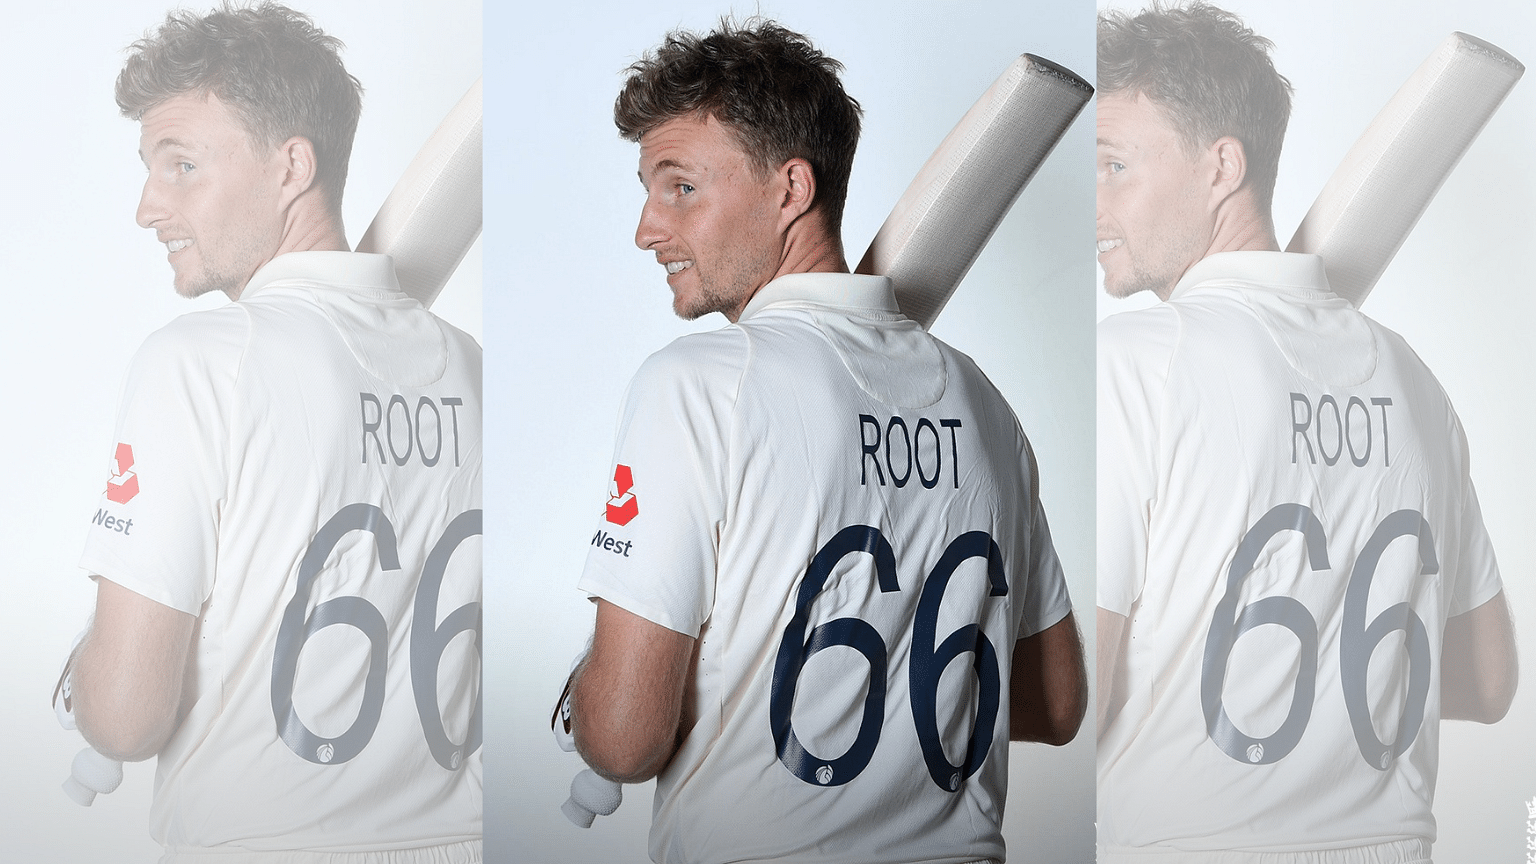 The ECB posted a picture of England skipper Joe Root in the new numbered jersey that will be worn in Test cricket.